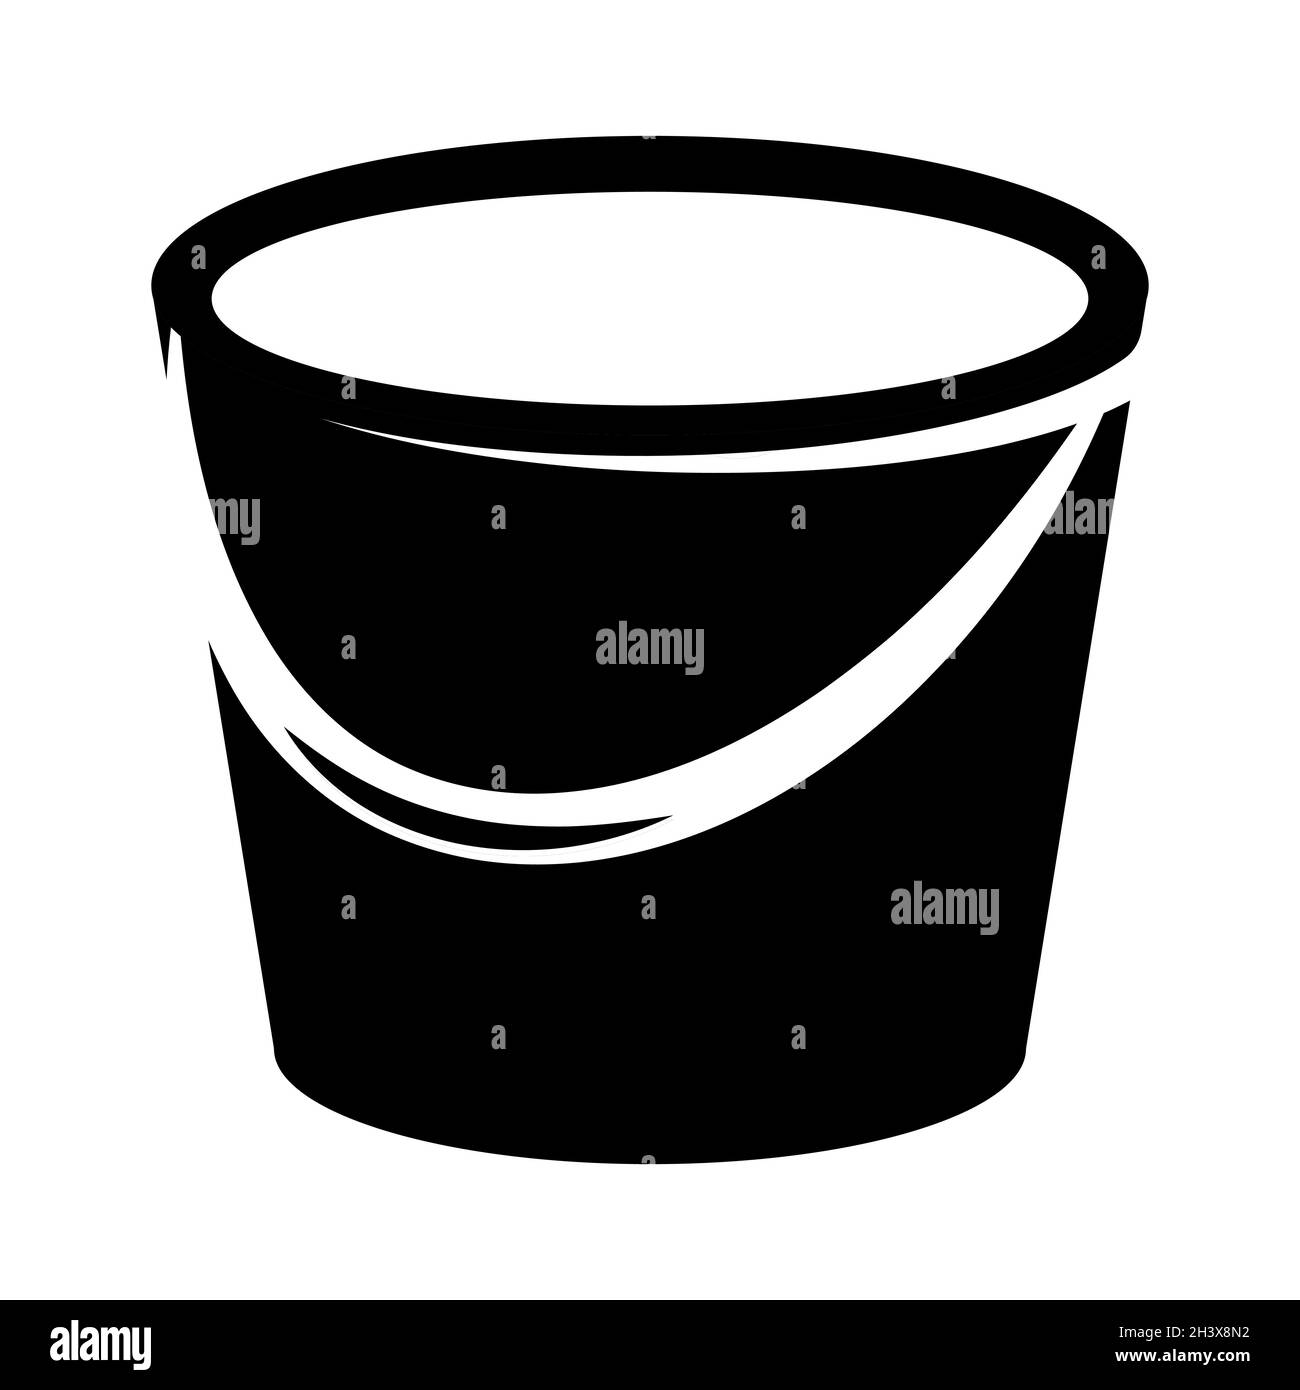 Bucket icon housekeeping cleaning tool. Black symbol isolated on white background. Vector illustration. Stock Vector